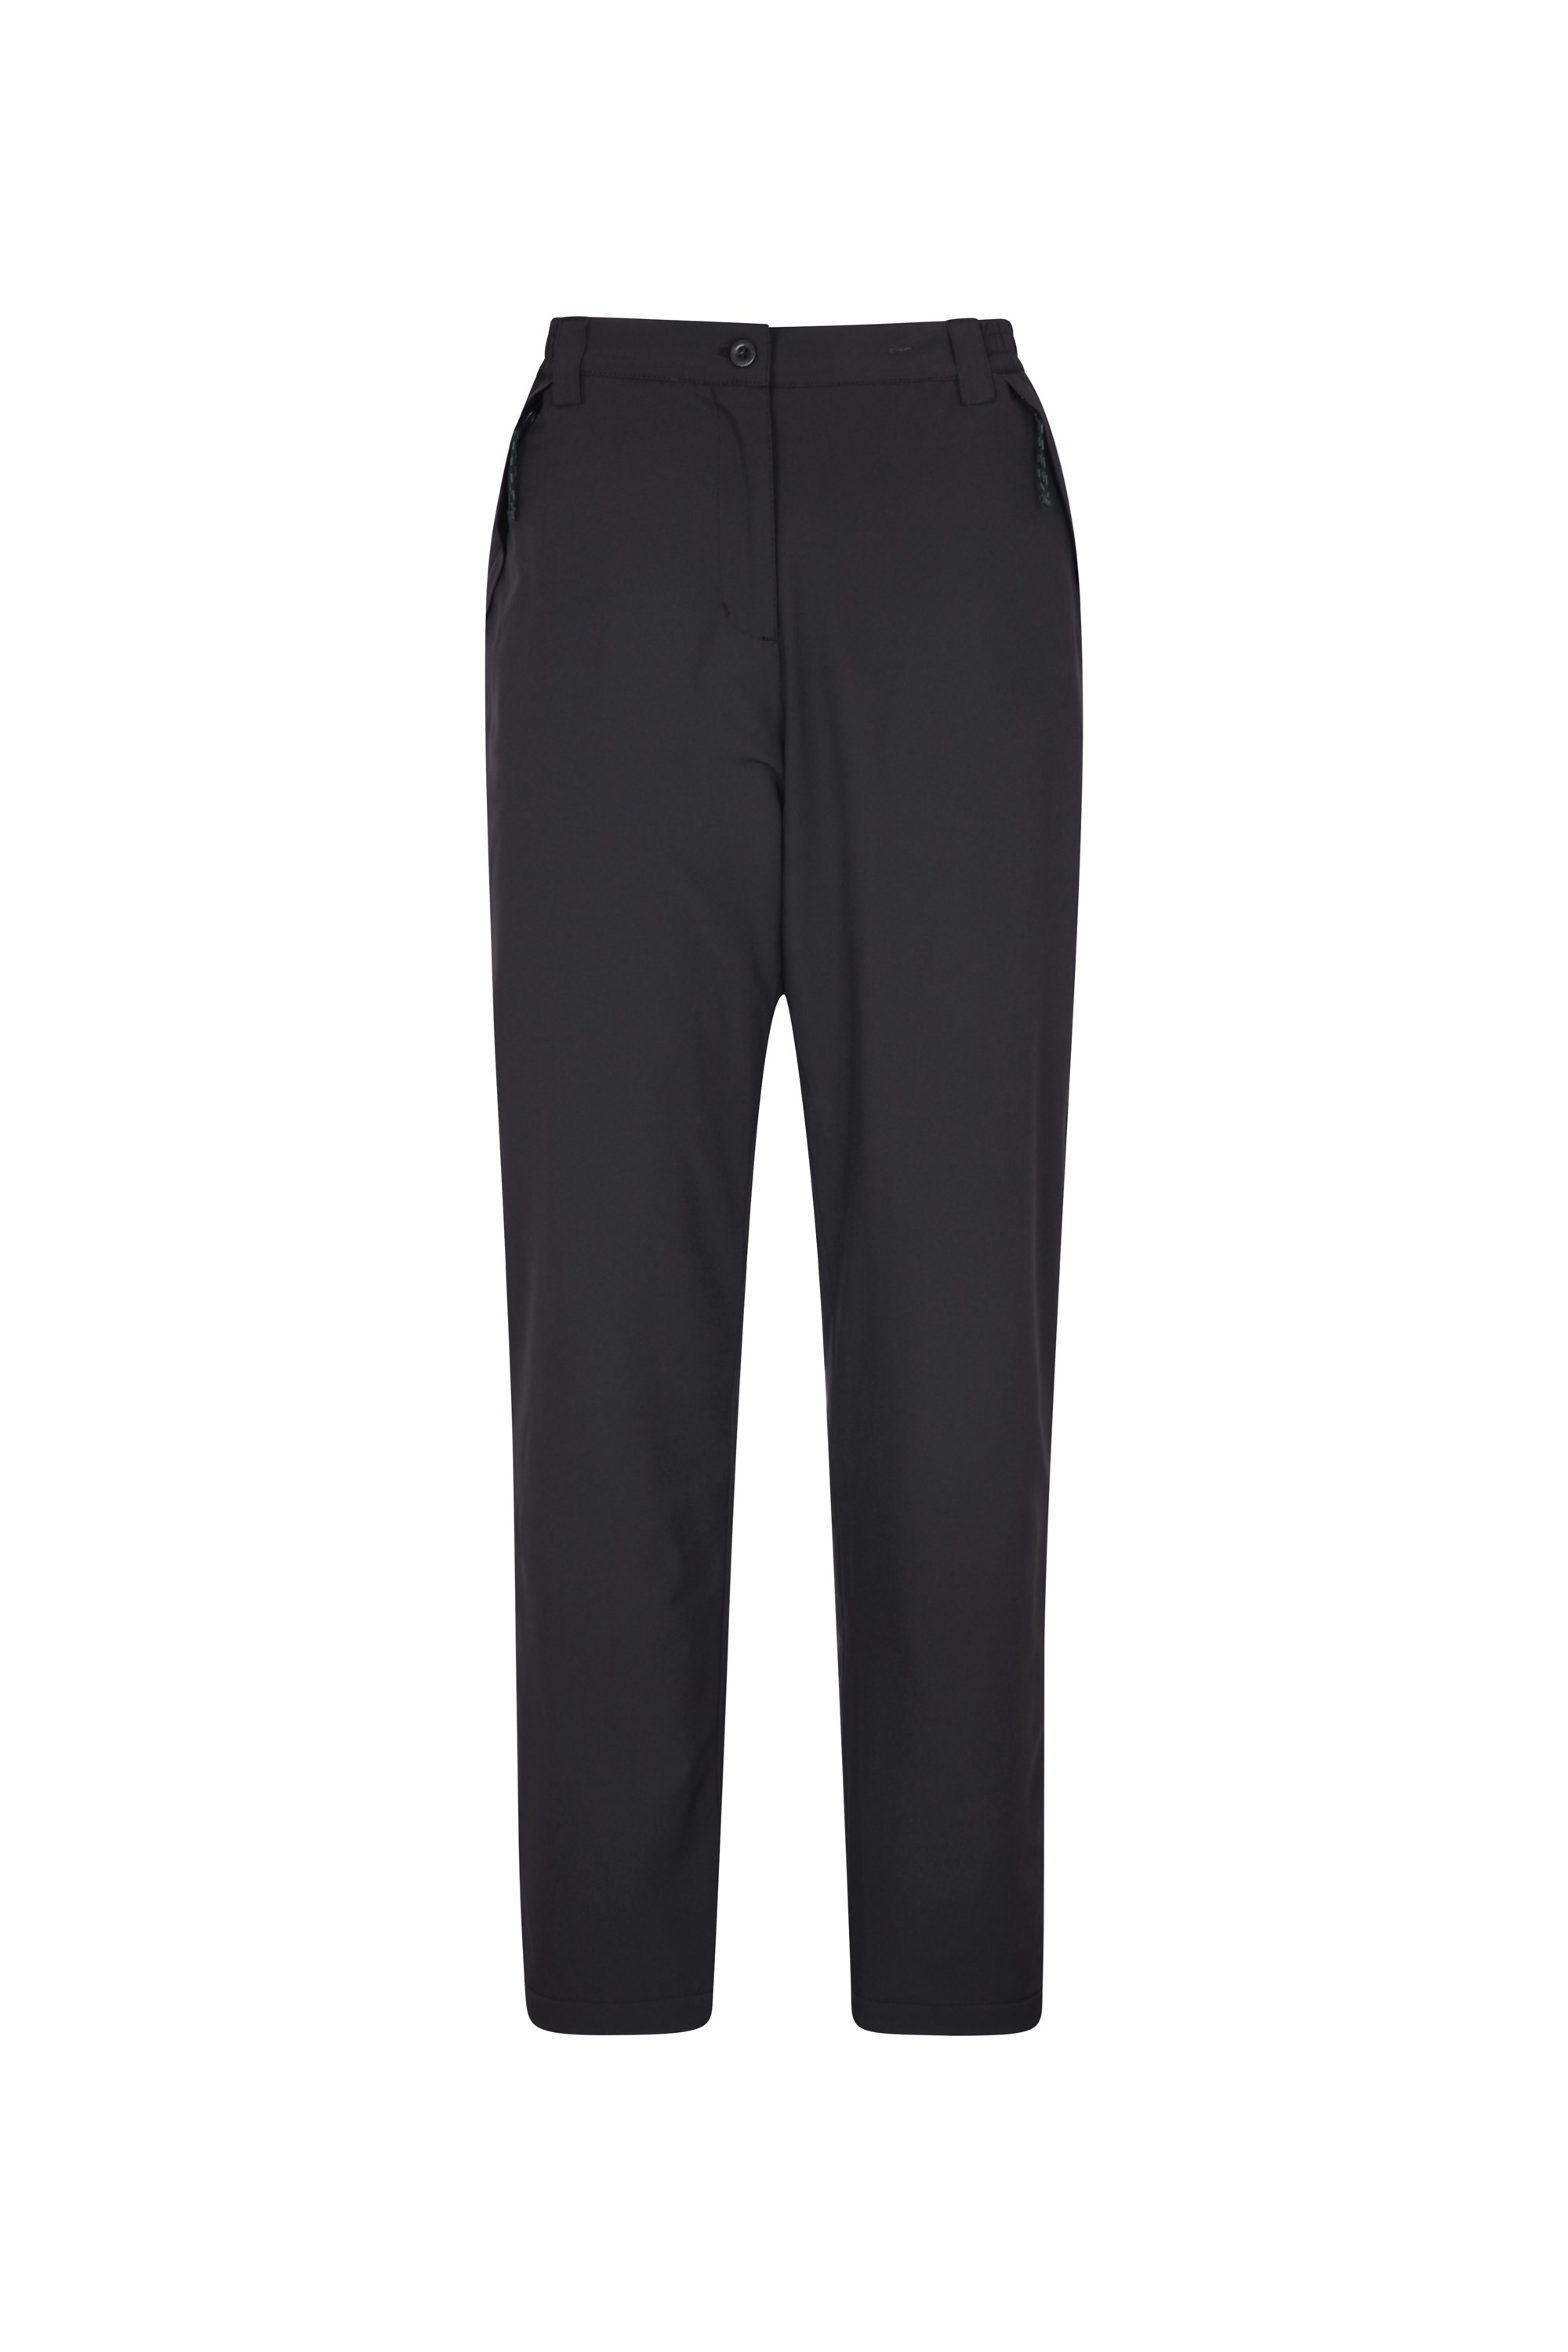 Arctic Fleece Lined Stretch Womens Trousers | Mountain Warehouse GB